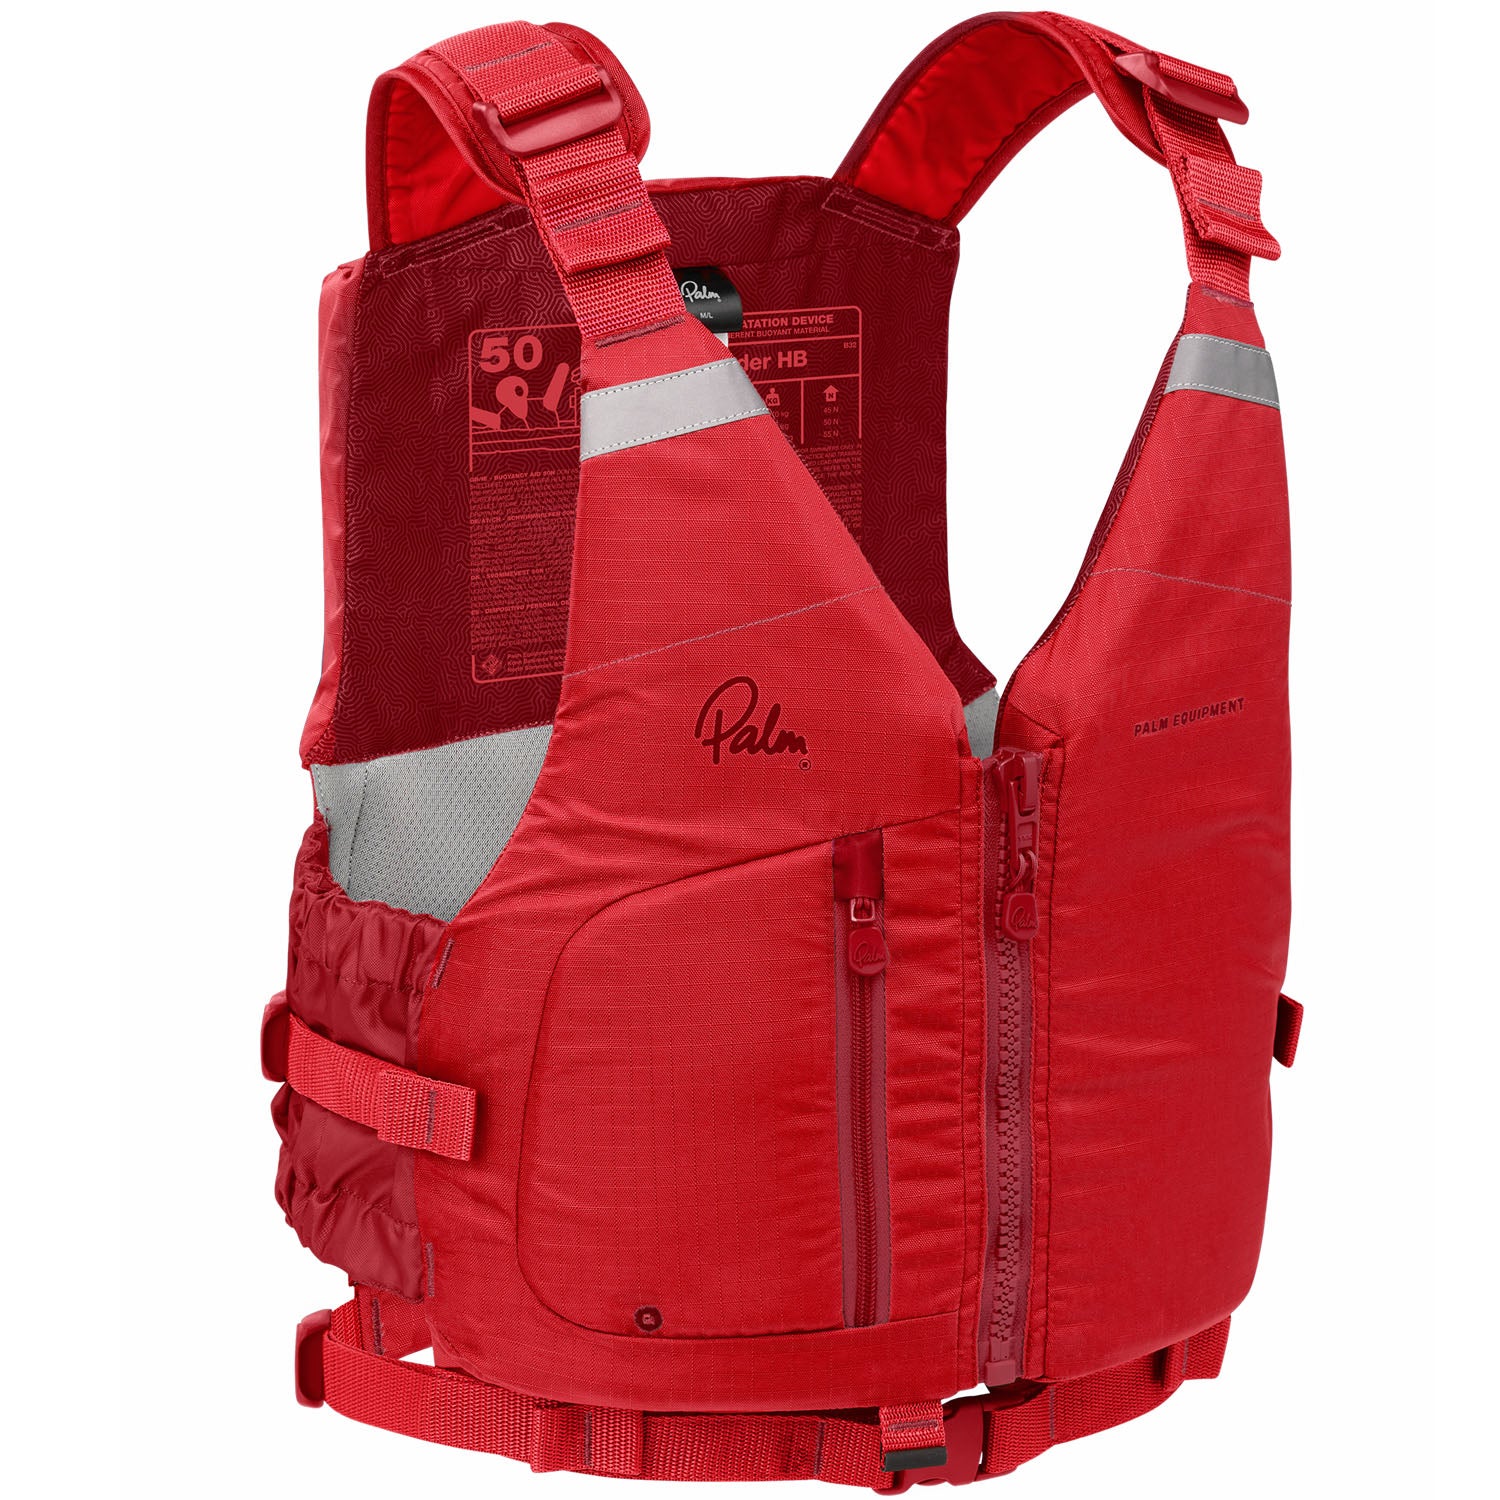 Palm Meander Highback Buoyancy Aid in Flame Red